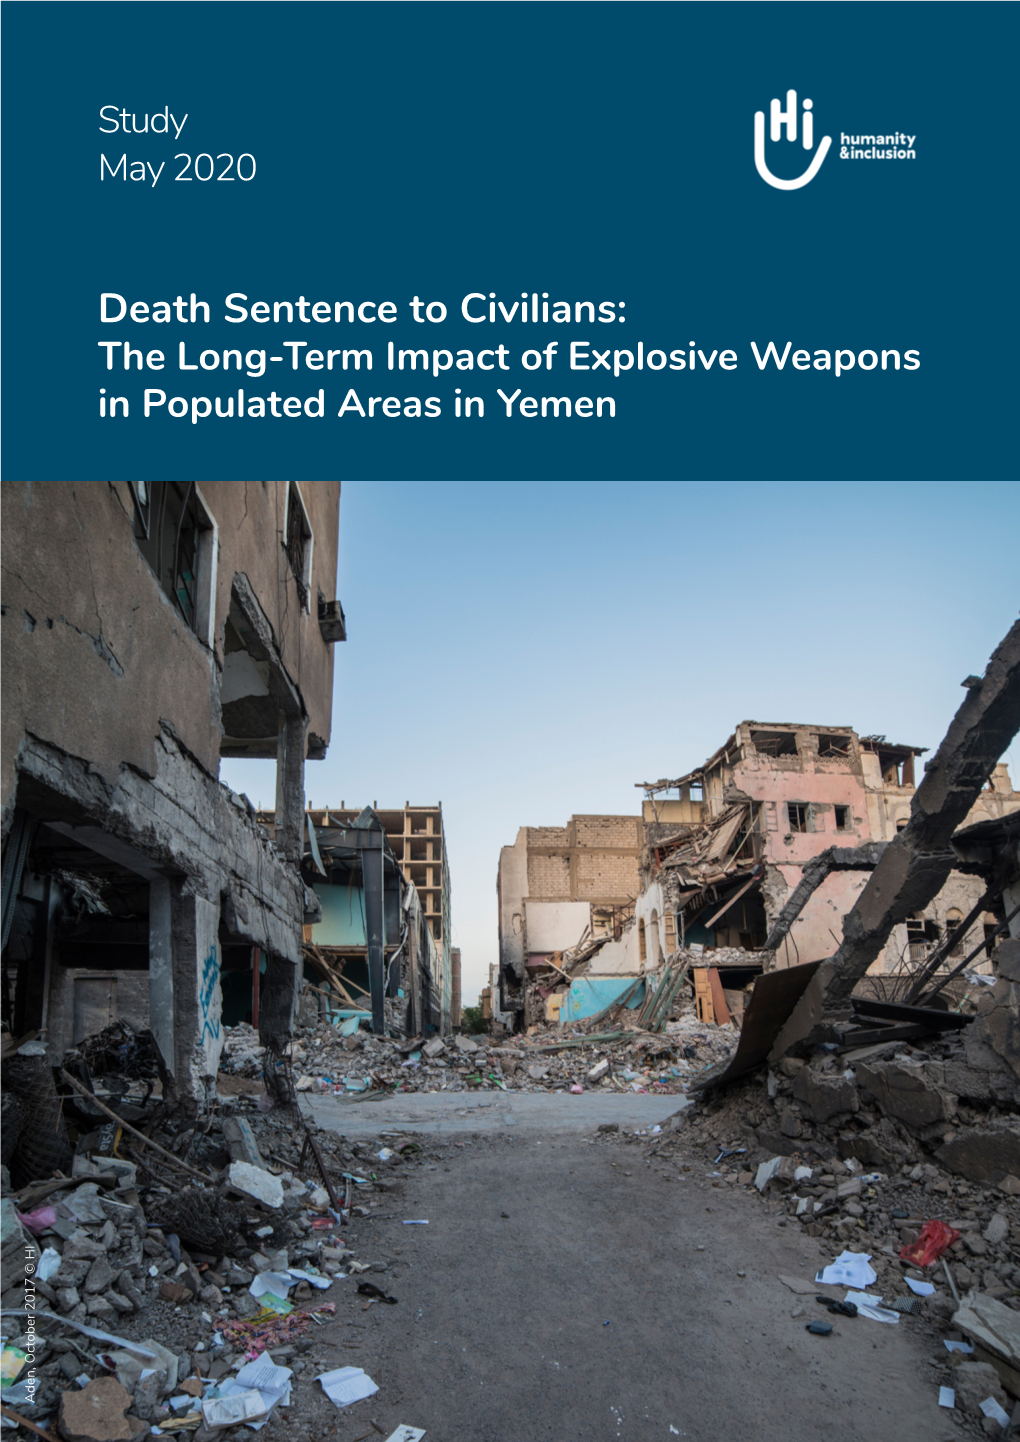 Death Sentence to Civilians: the Long-Term Impact of Explosive Weapons in Populated Areas in Yemen Aden, October 2017 © HI Humanity & Inclusion